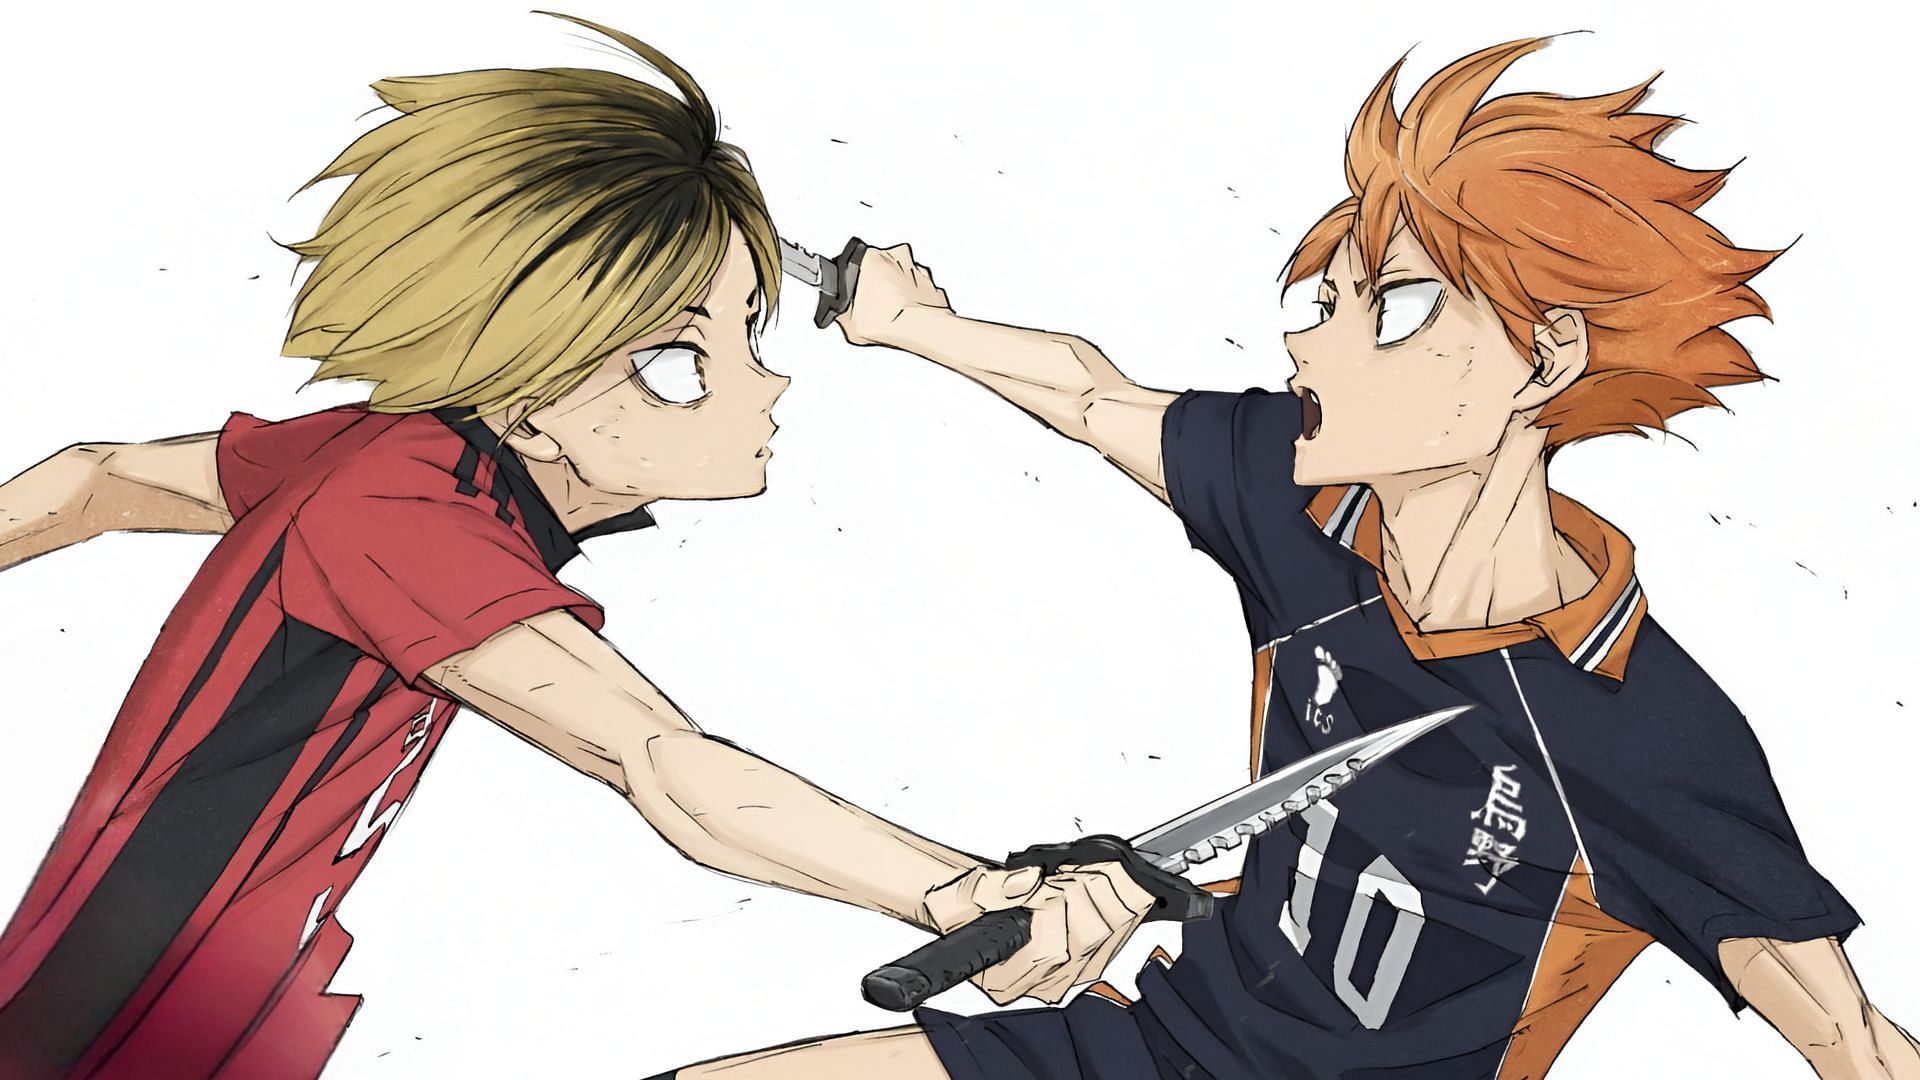 Haikyuu!! The Battle at the Garbage Dump director hypes up the&nbsp;movie